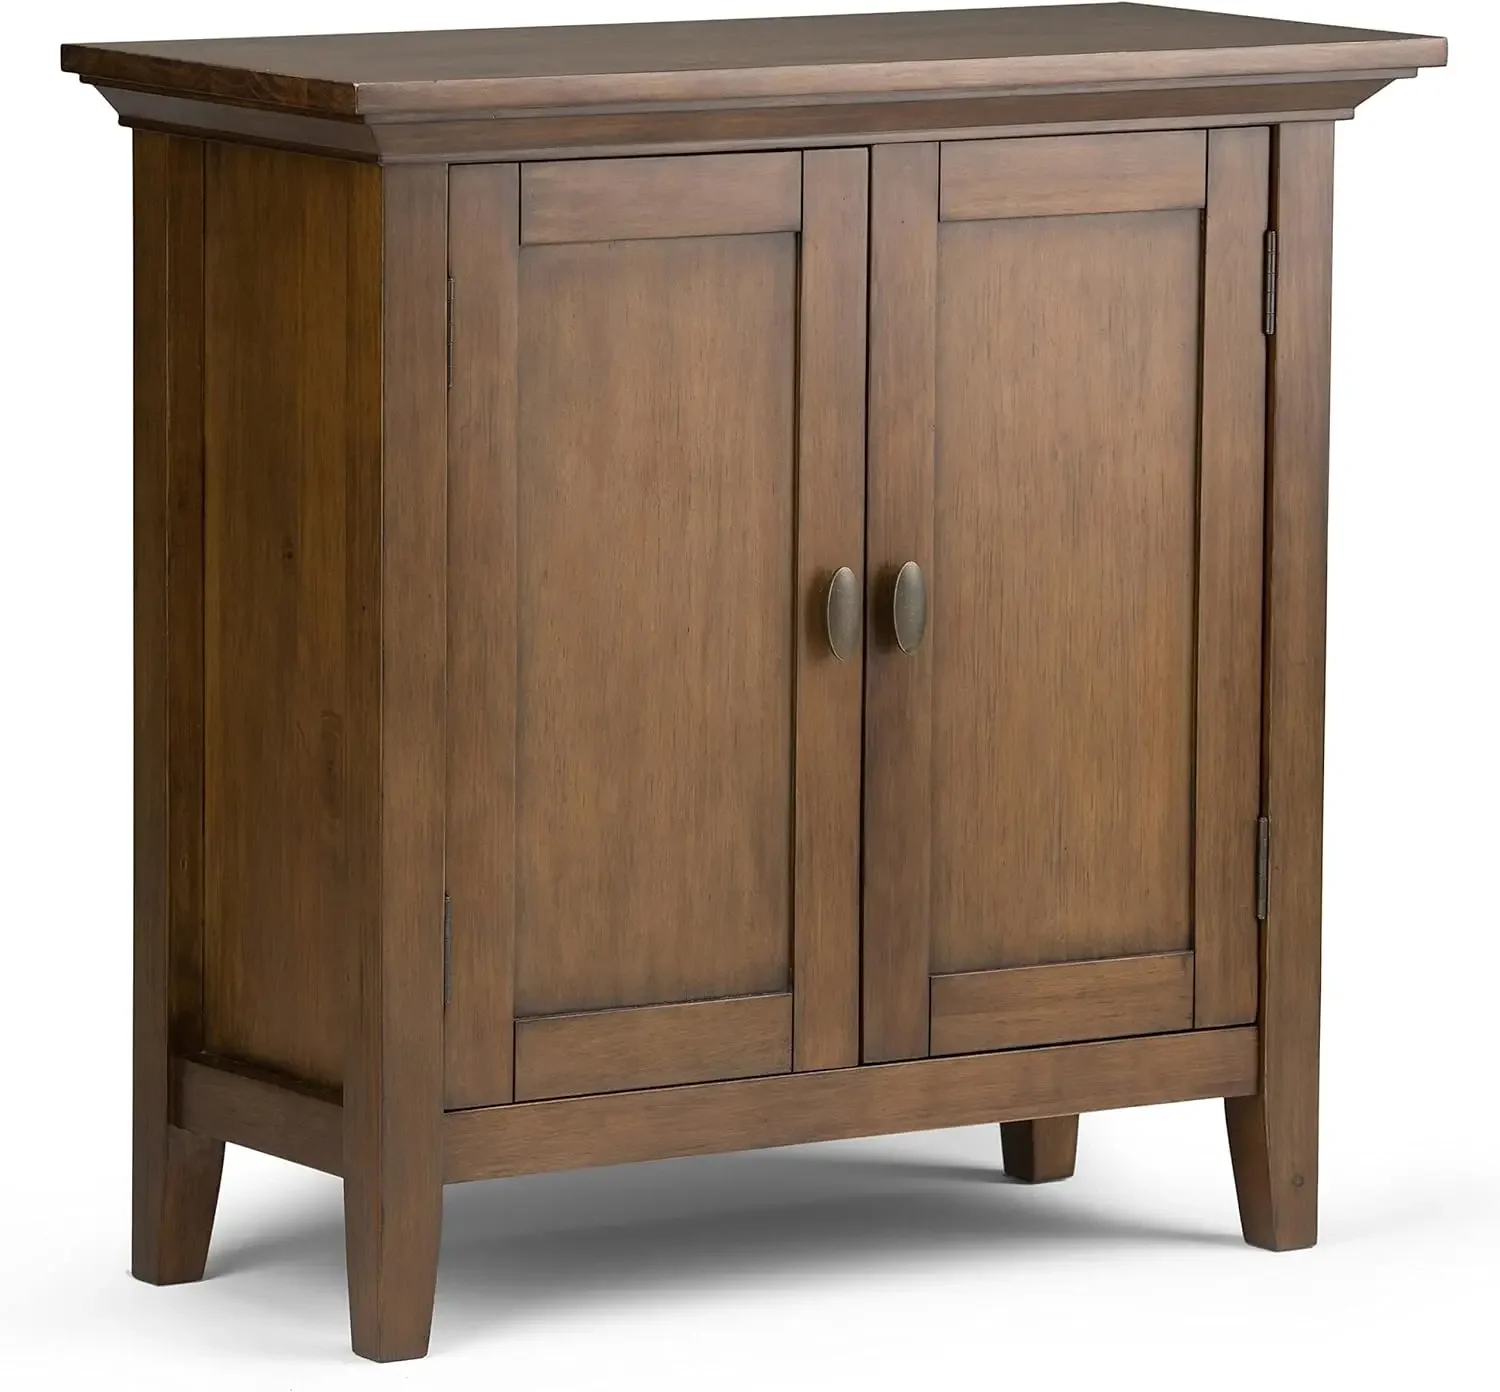 

Redmond SOLID WOOD 32 inch Wide Transitional Low Storage Cabinet in Rustic Natural Aged Brown for the Living Room